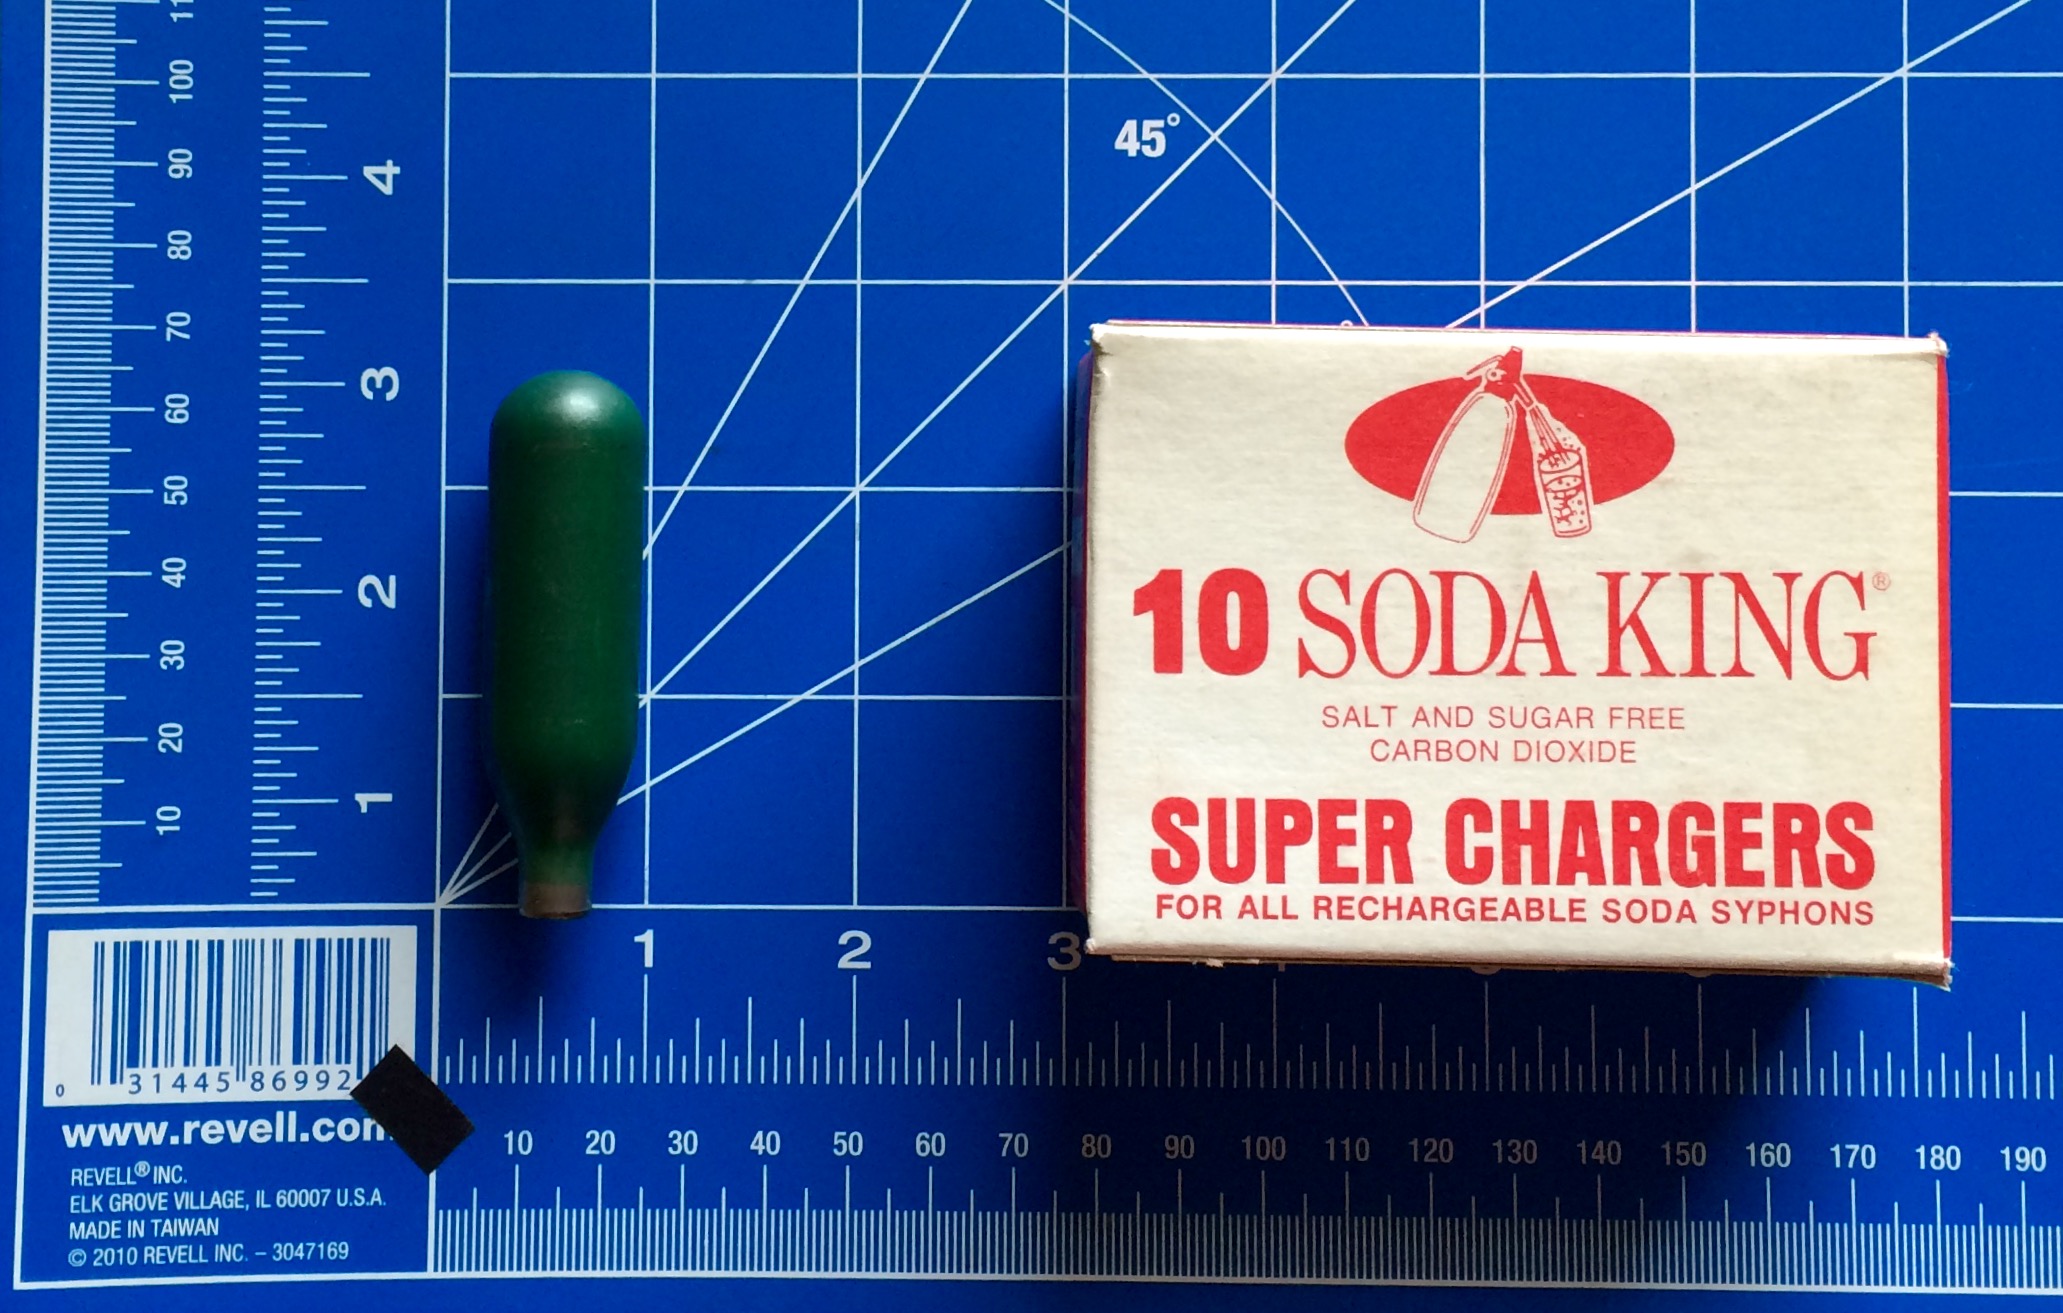 SODA KING
Super Chargers

Used for Han's Belt Greeblie.
Also, I will likely make a not screen-accurate Prawn Assault Rifle from District 9 with th